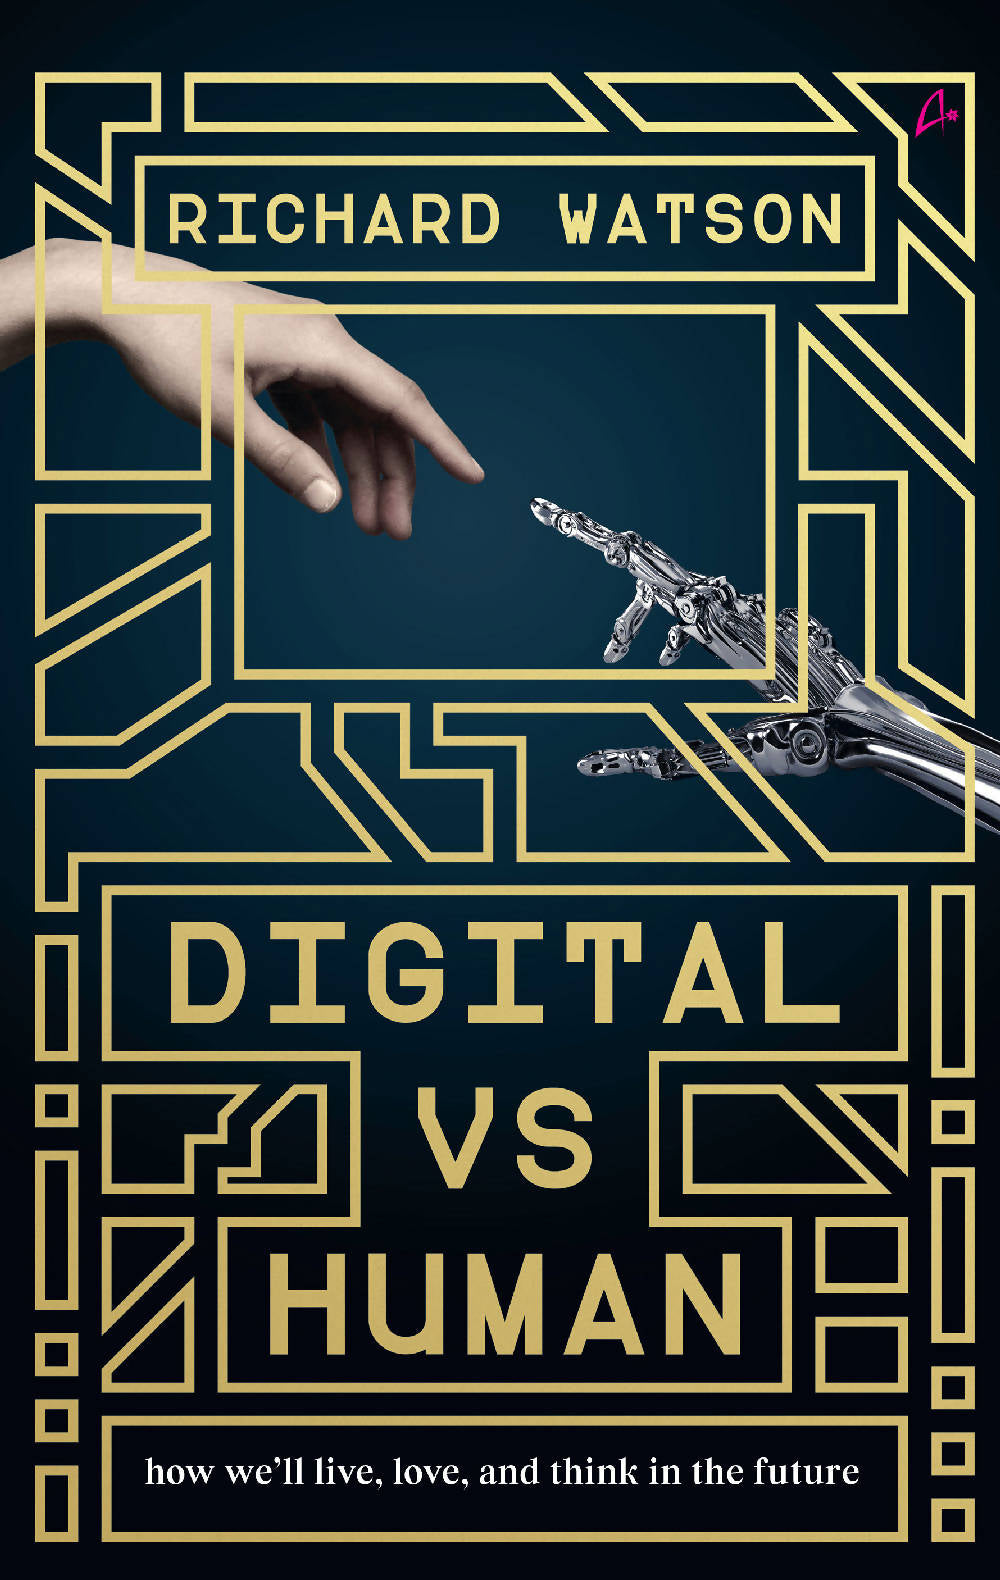 DIGITAL VS HUMAN - HOW WE'LL LIVE, LOVE, AND THINK IN THE FUTURE